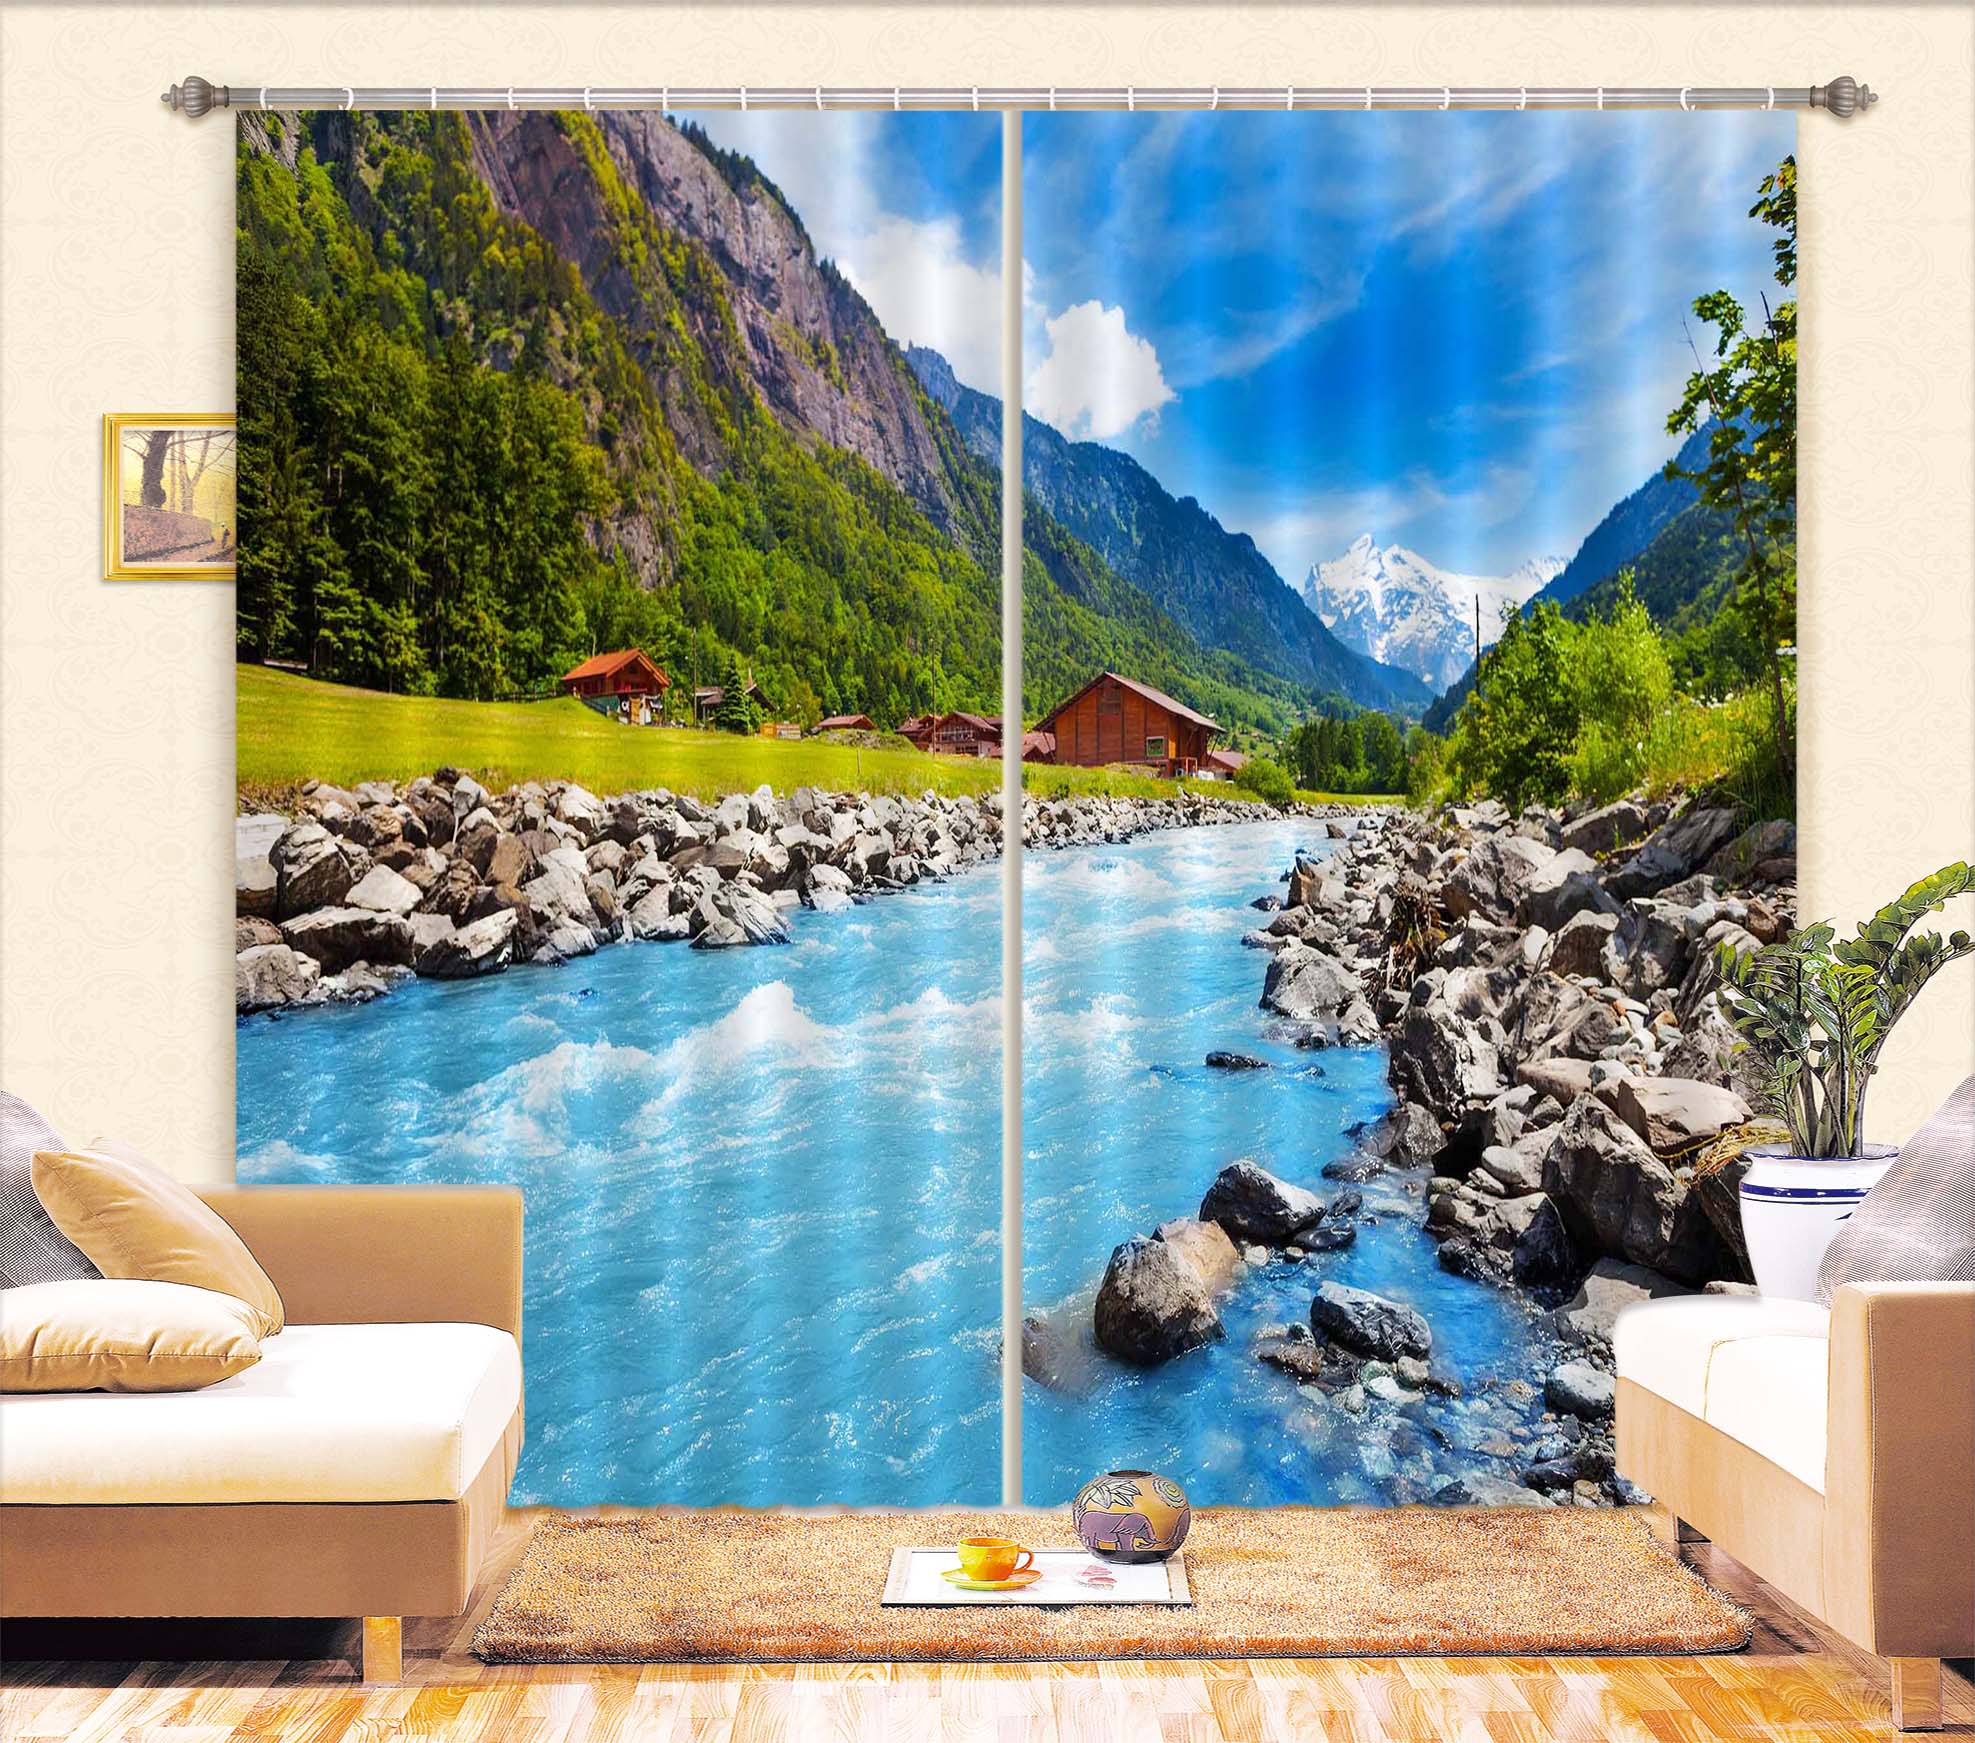 3D Valley River 807 Curtains Drapes